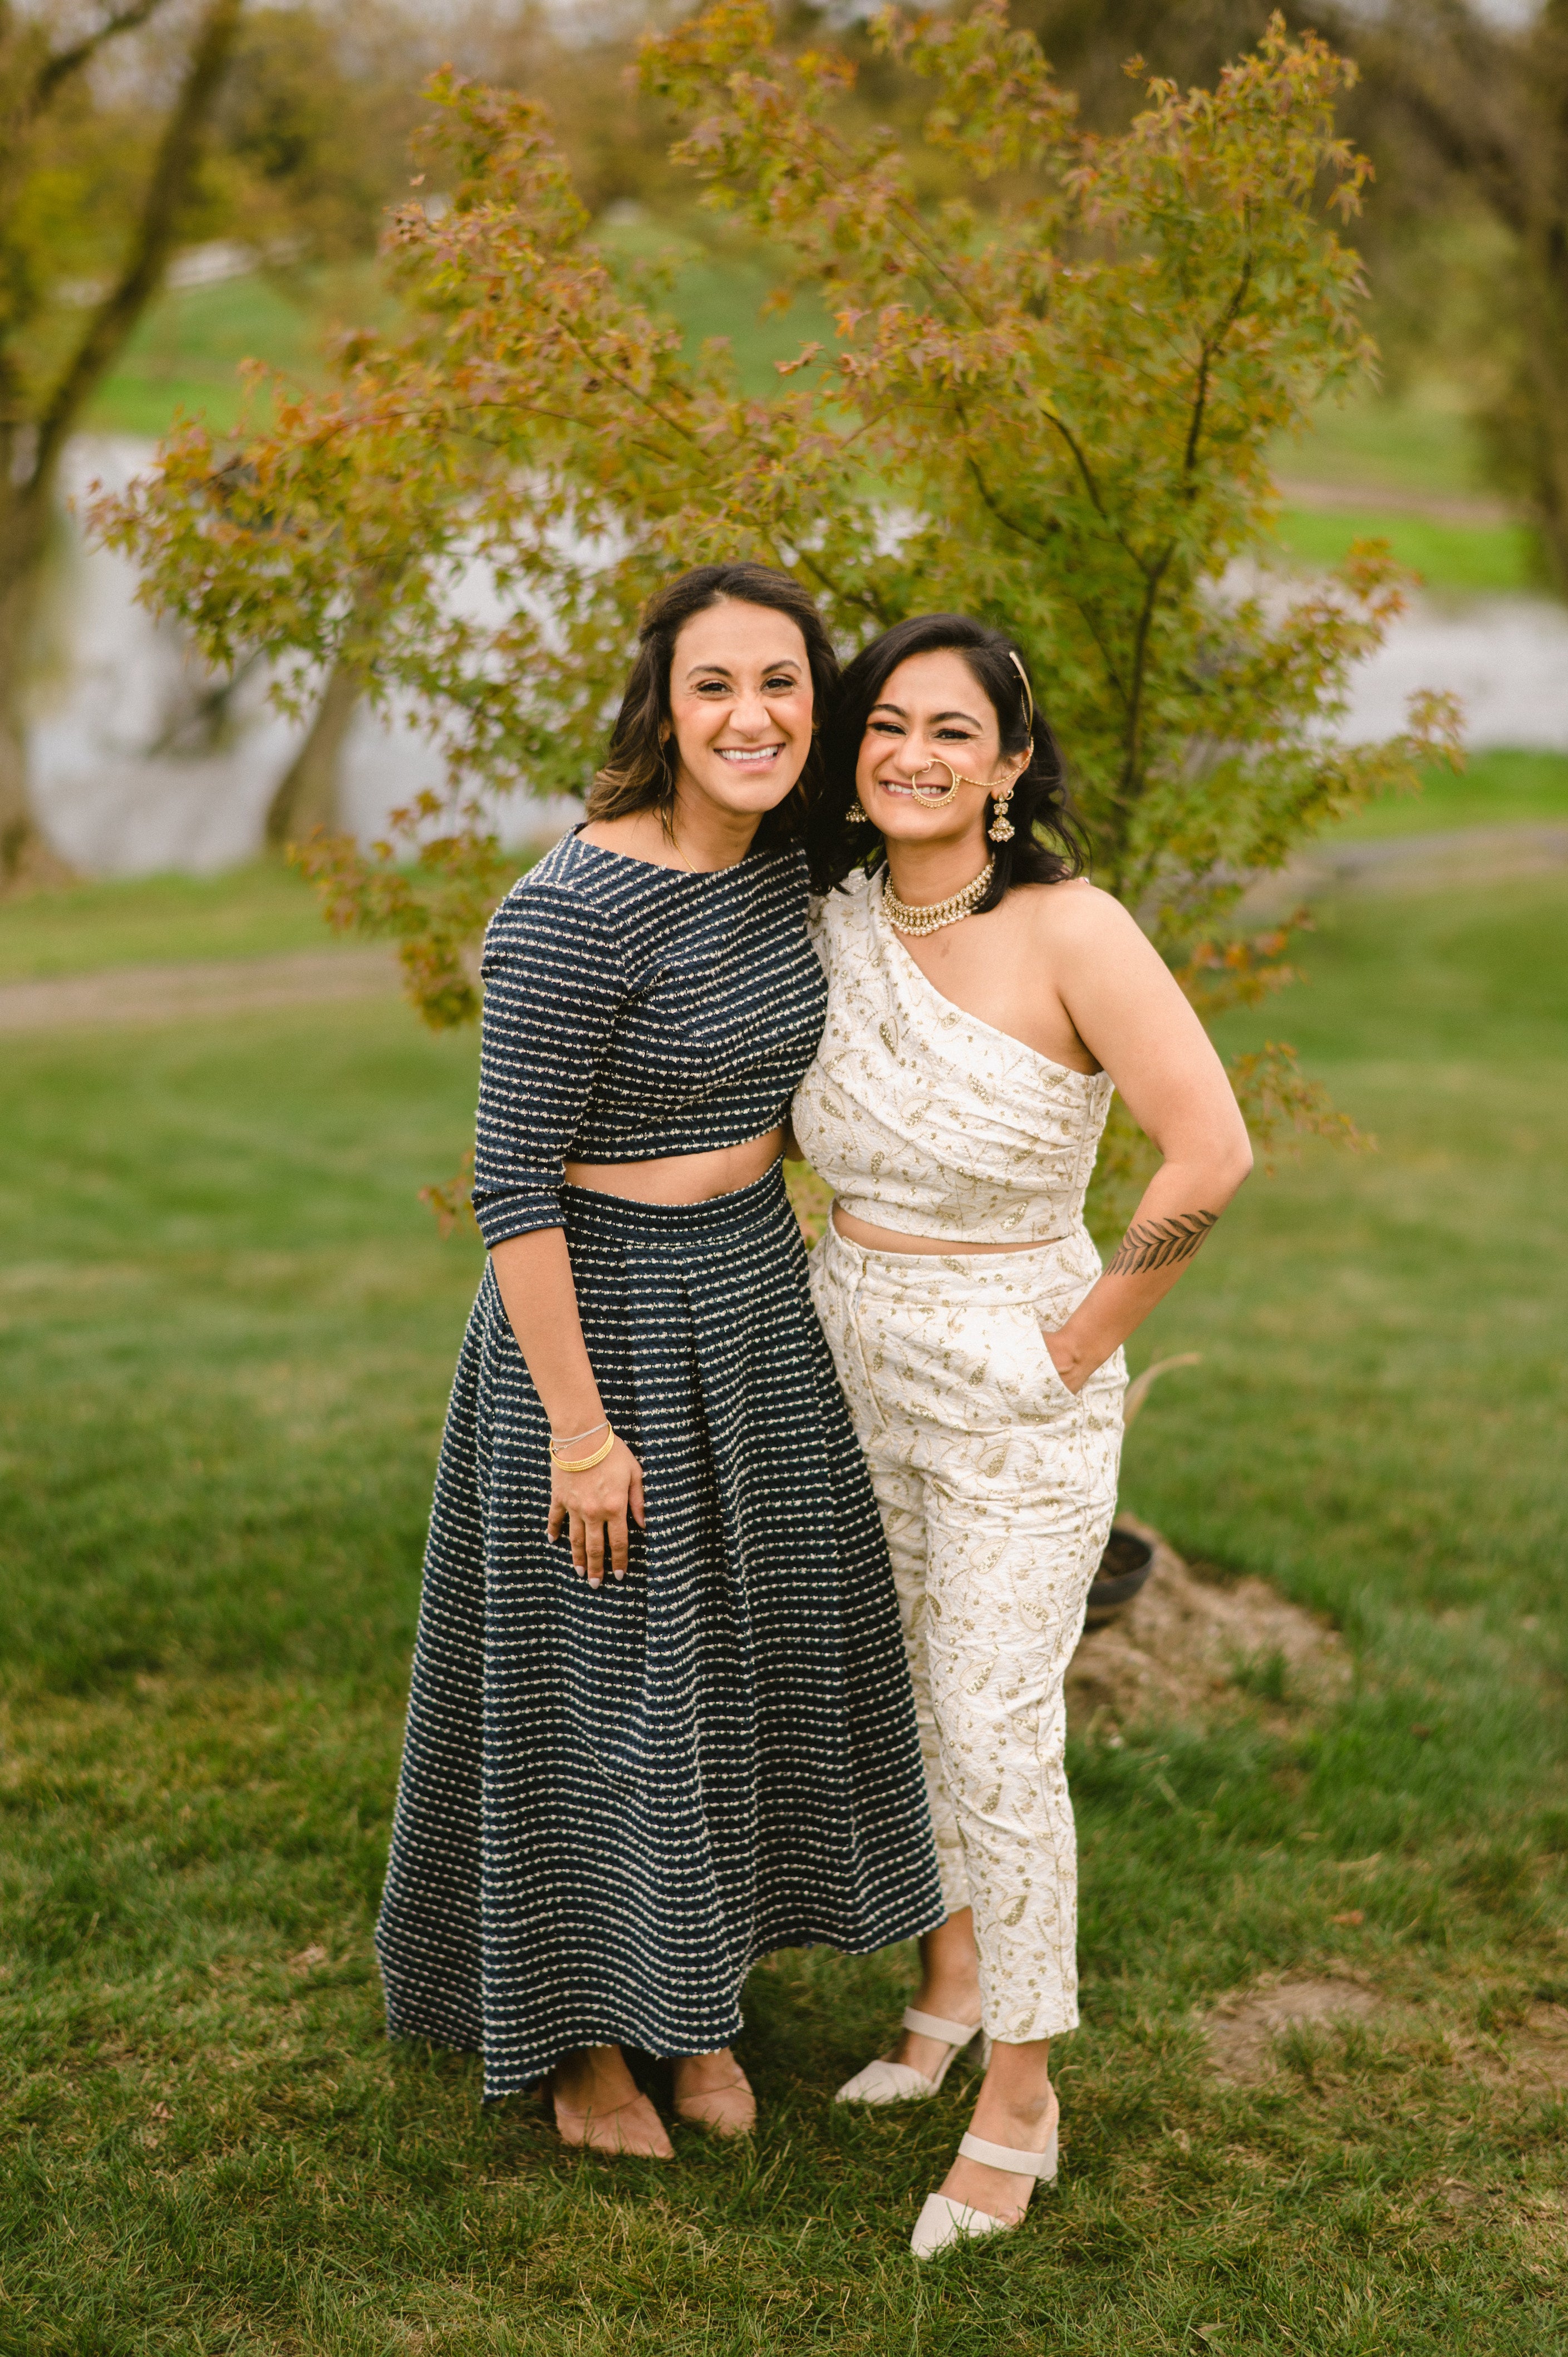 THE SISTER SESSION – Capturing Moments One Wink at a Time ~ through  Photography, Blog and Laughter!